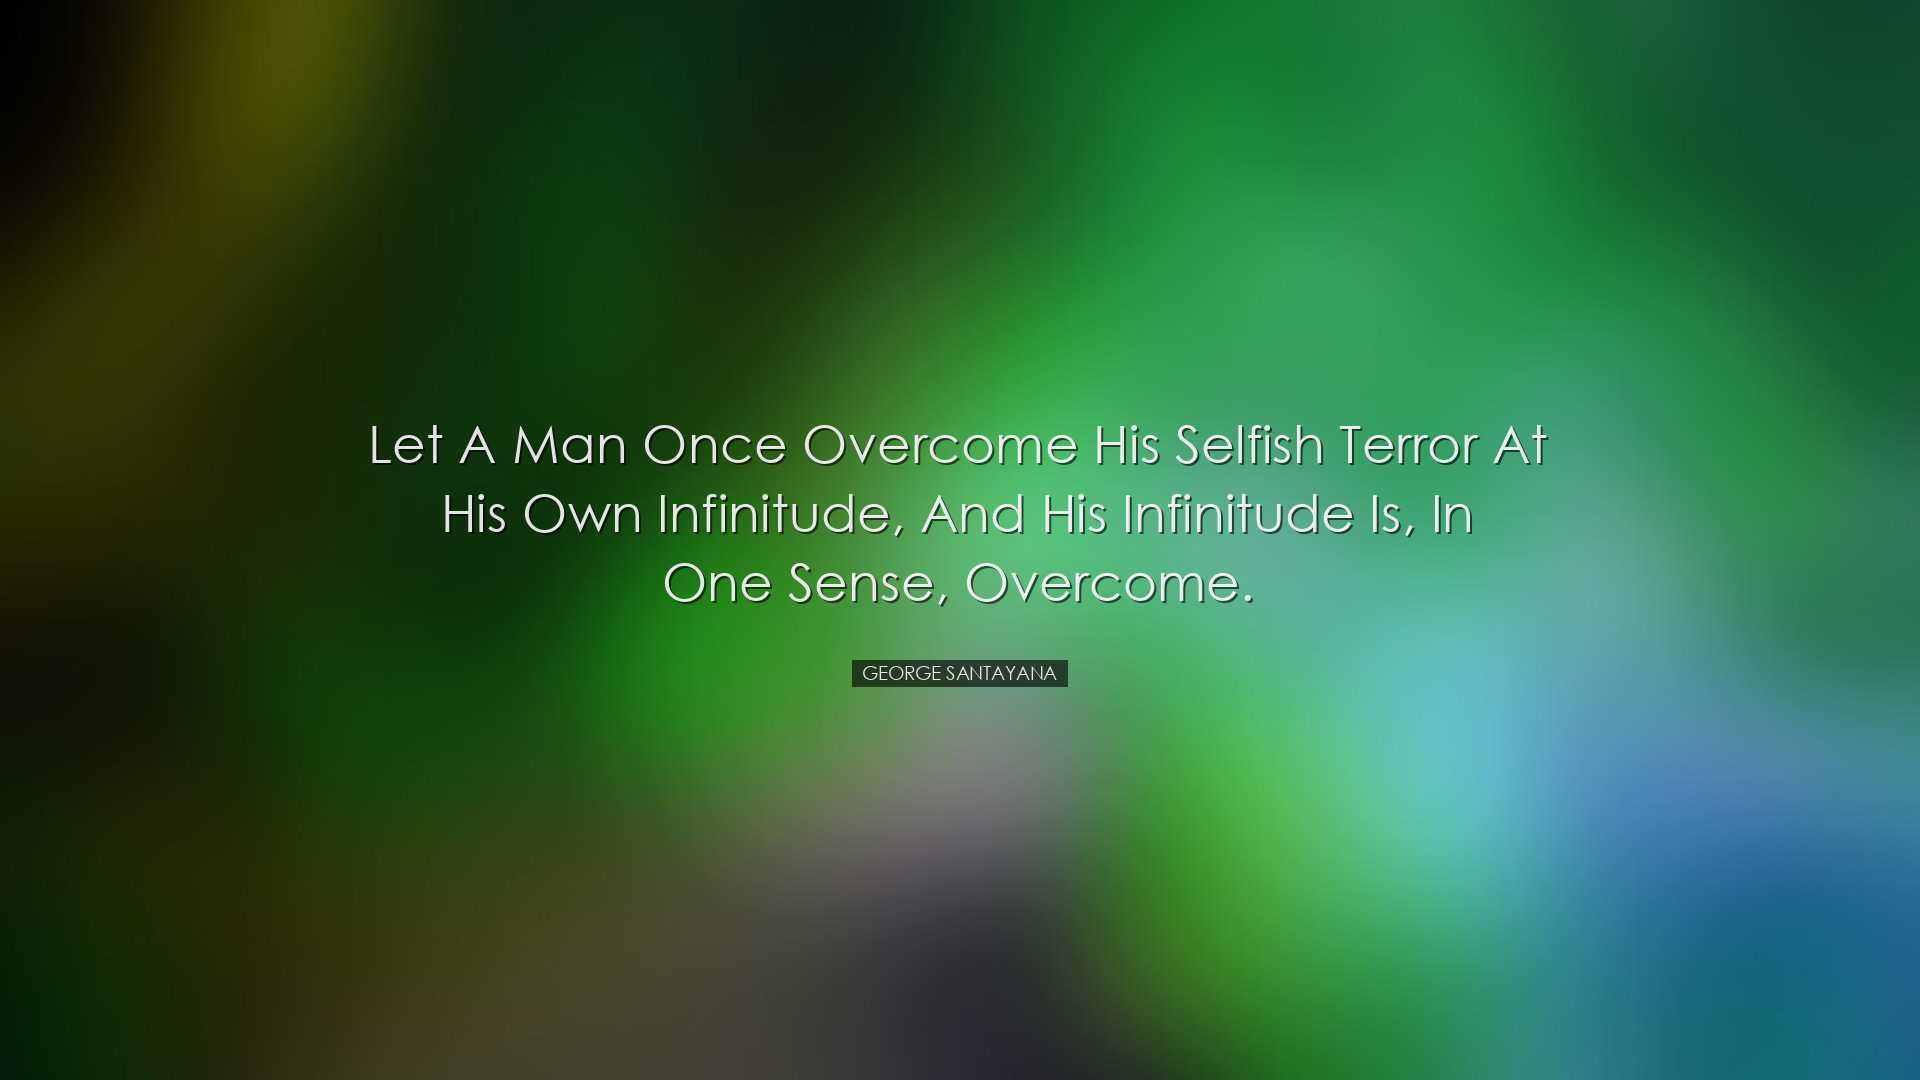 Let a man once overcome his selfish terror at his own infinitude,